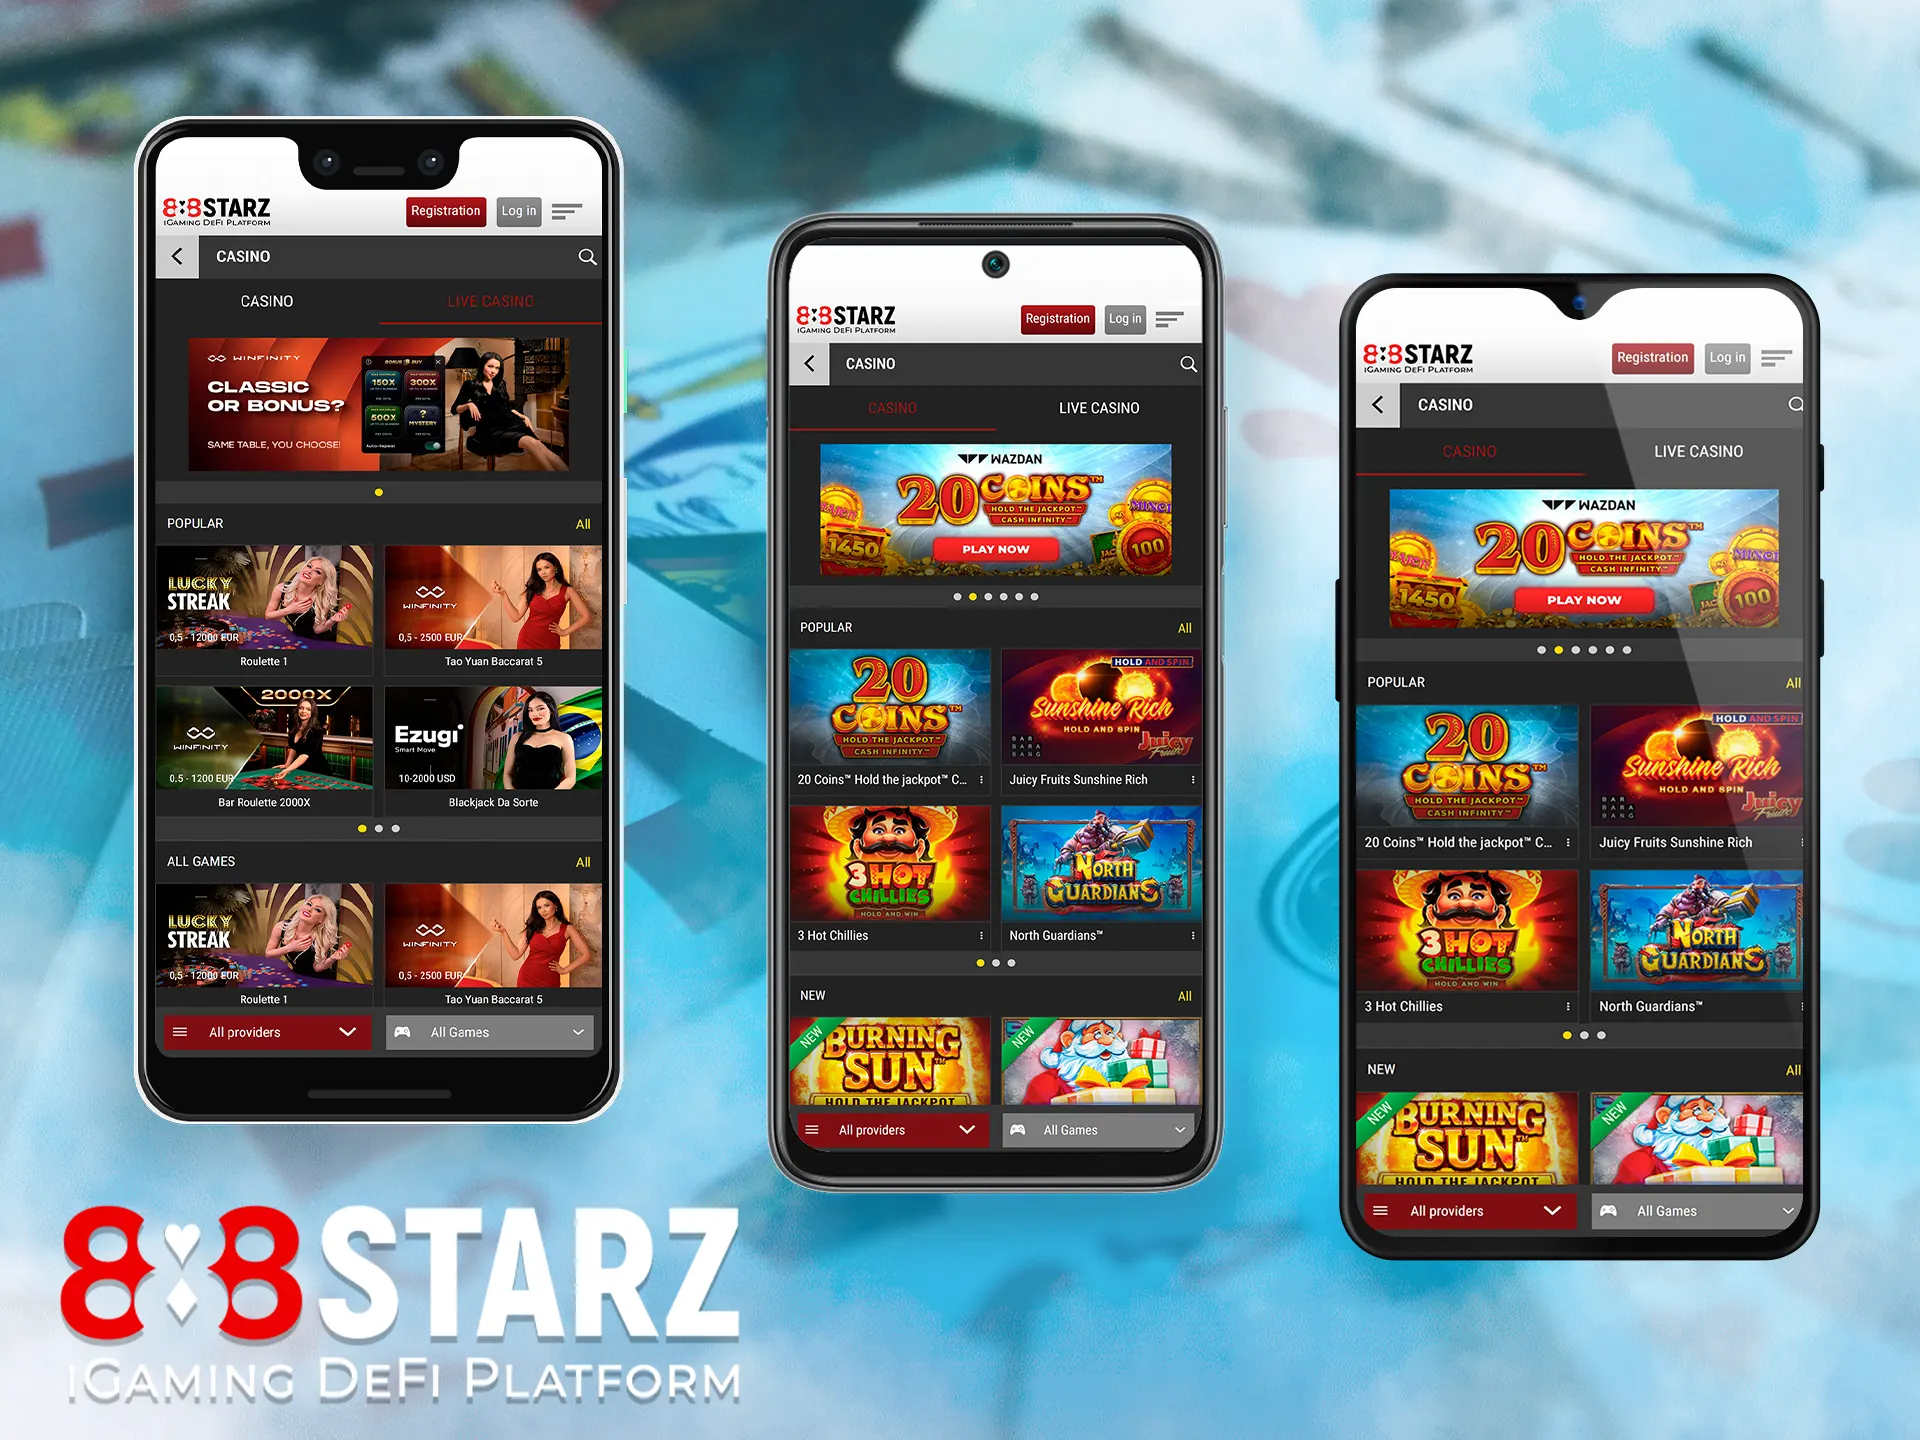 Thanks to detailed tests we can say that the 888starz software for green robot works on all popular devices.